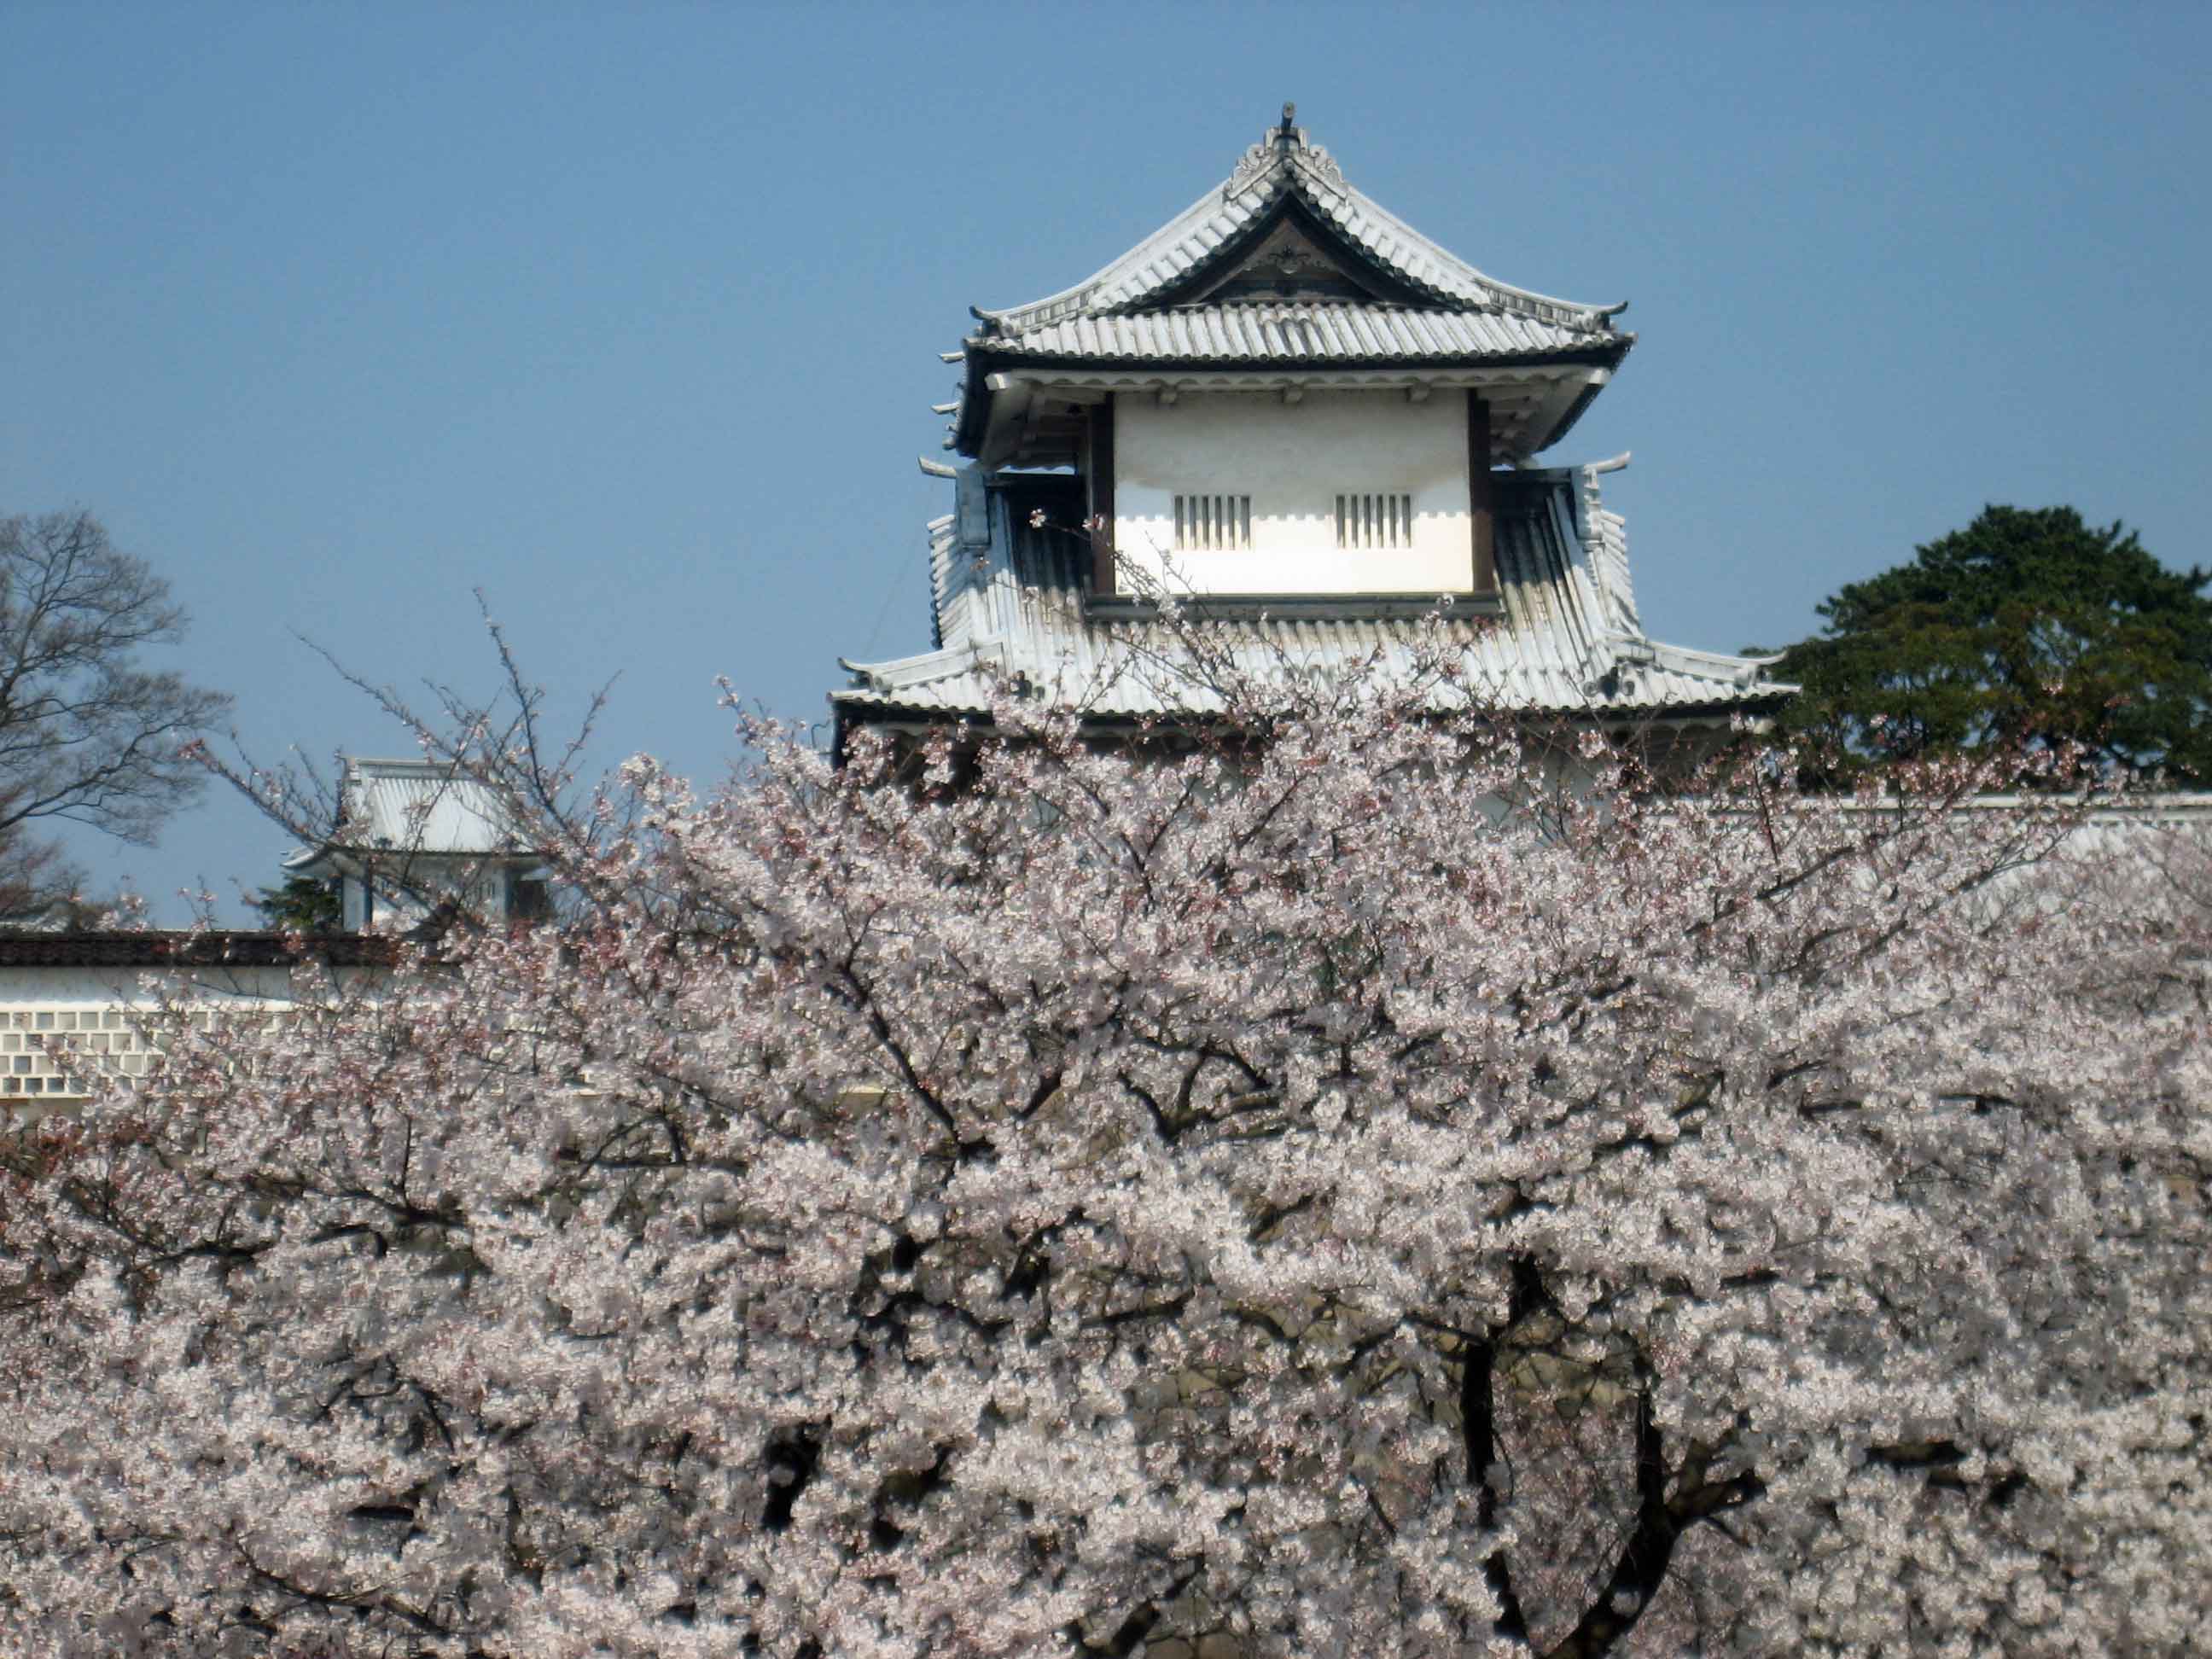 Magnificent display of cherry blossom flowers against stone wall of Kanazawa Castle/Park